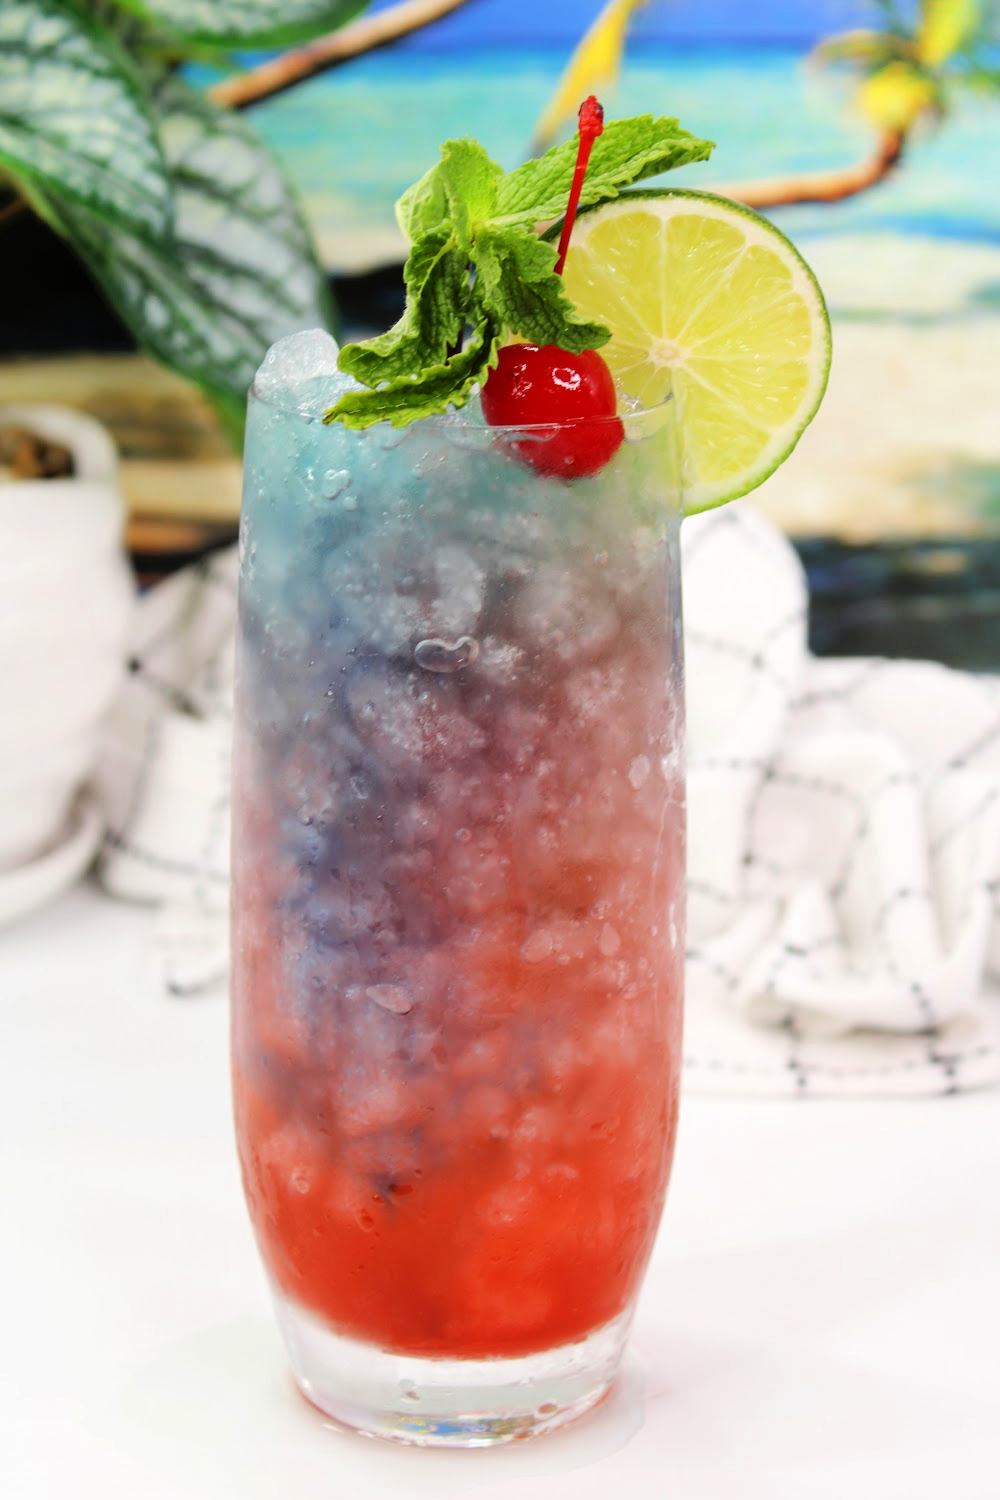 This shark bite cocktail looks like blue ocean water with grenadine added to look like blood from a shark bite.